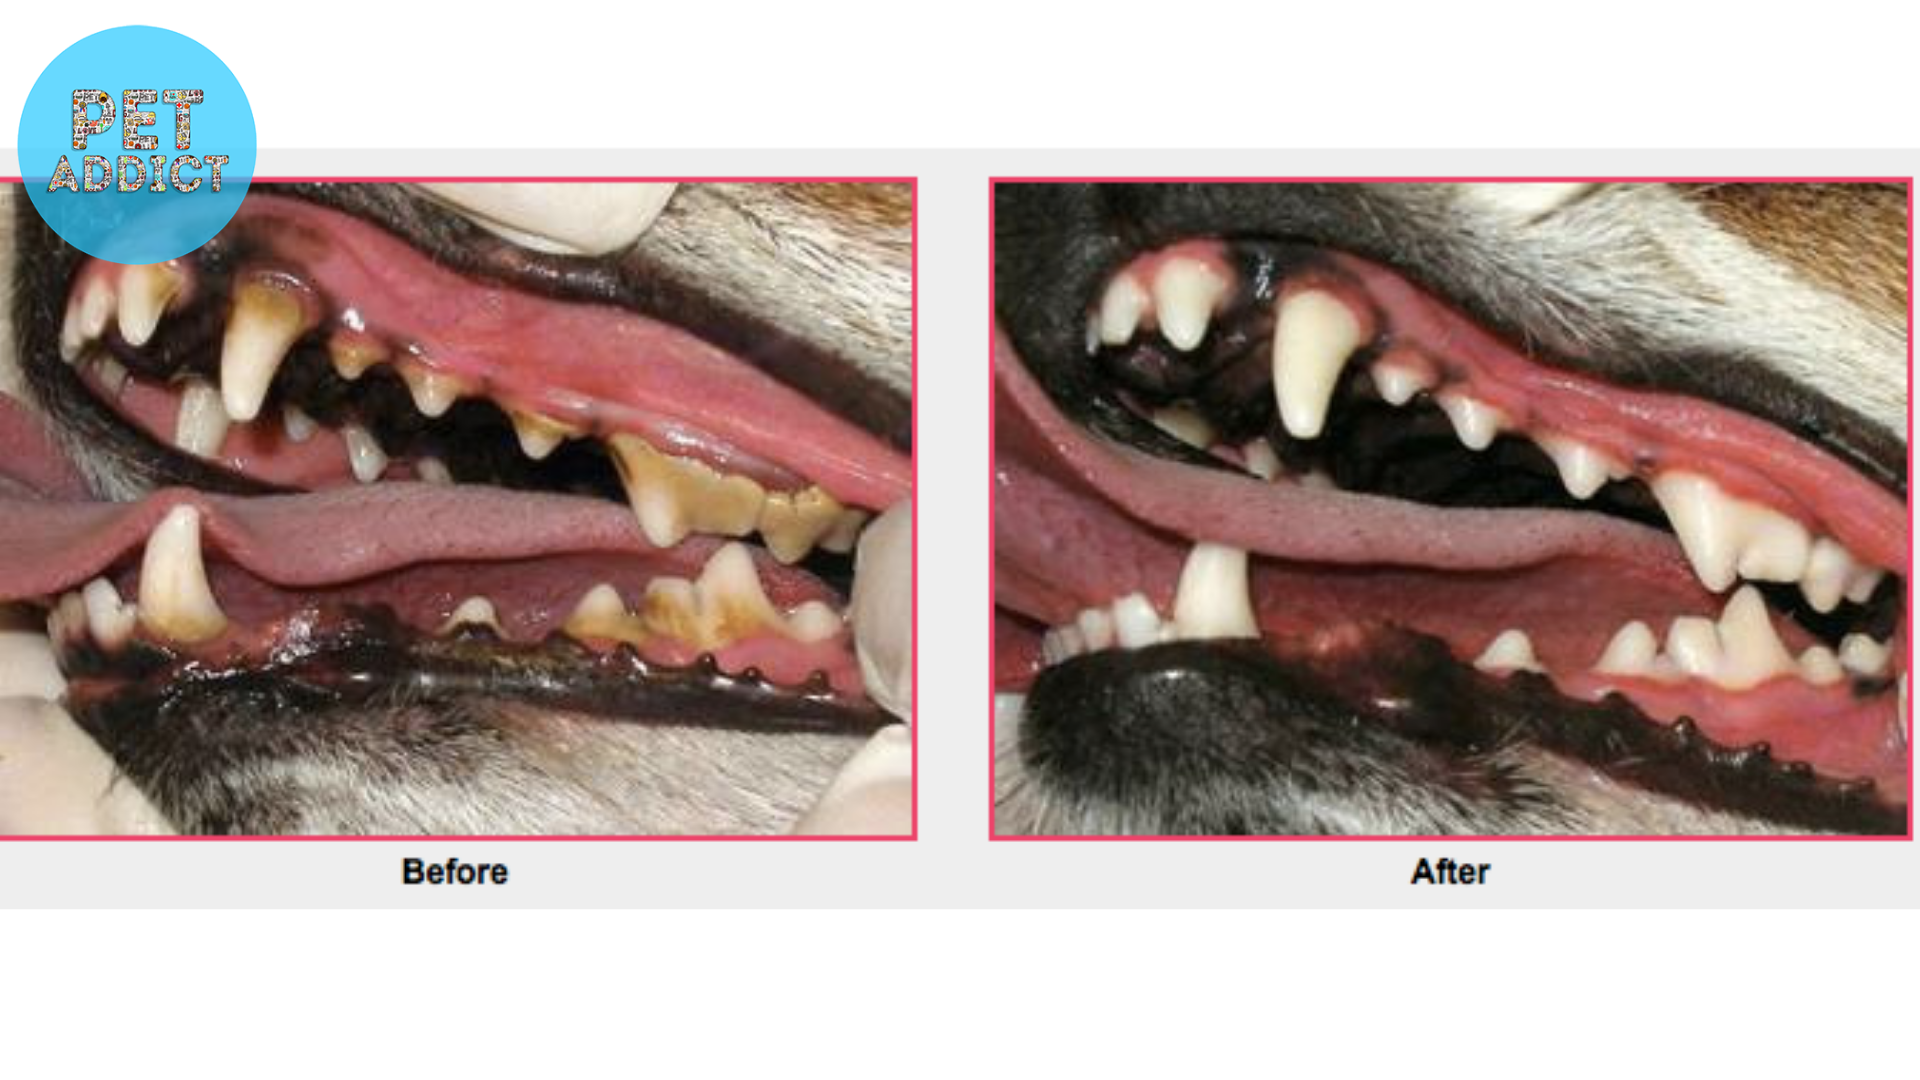 Common Dental Issues in Dogs